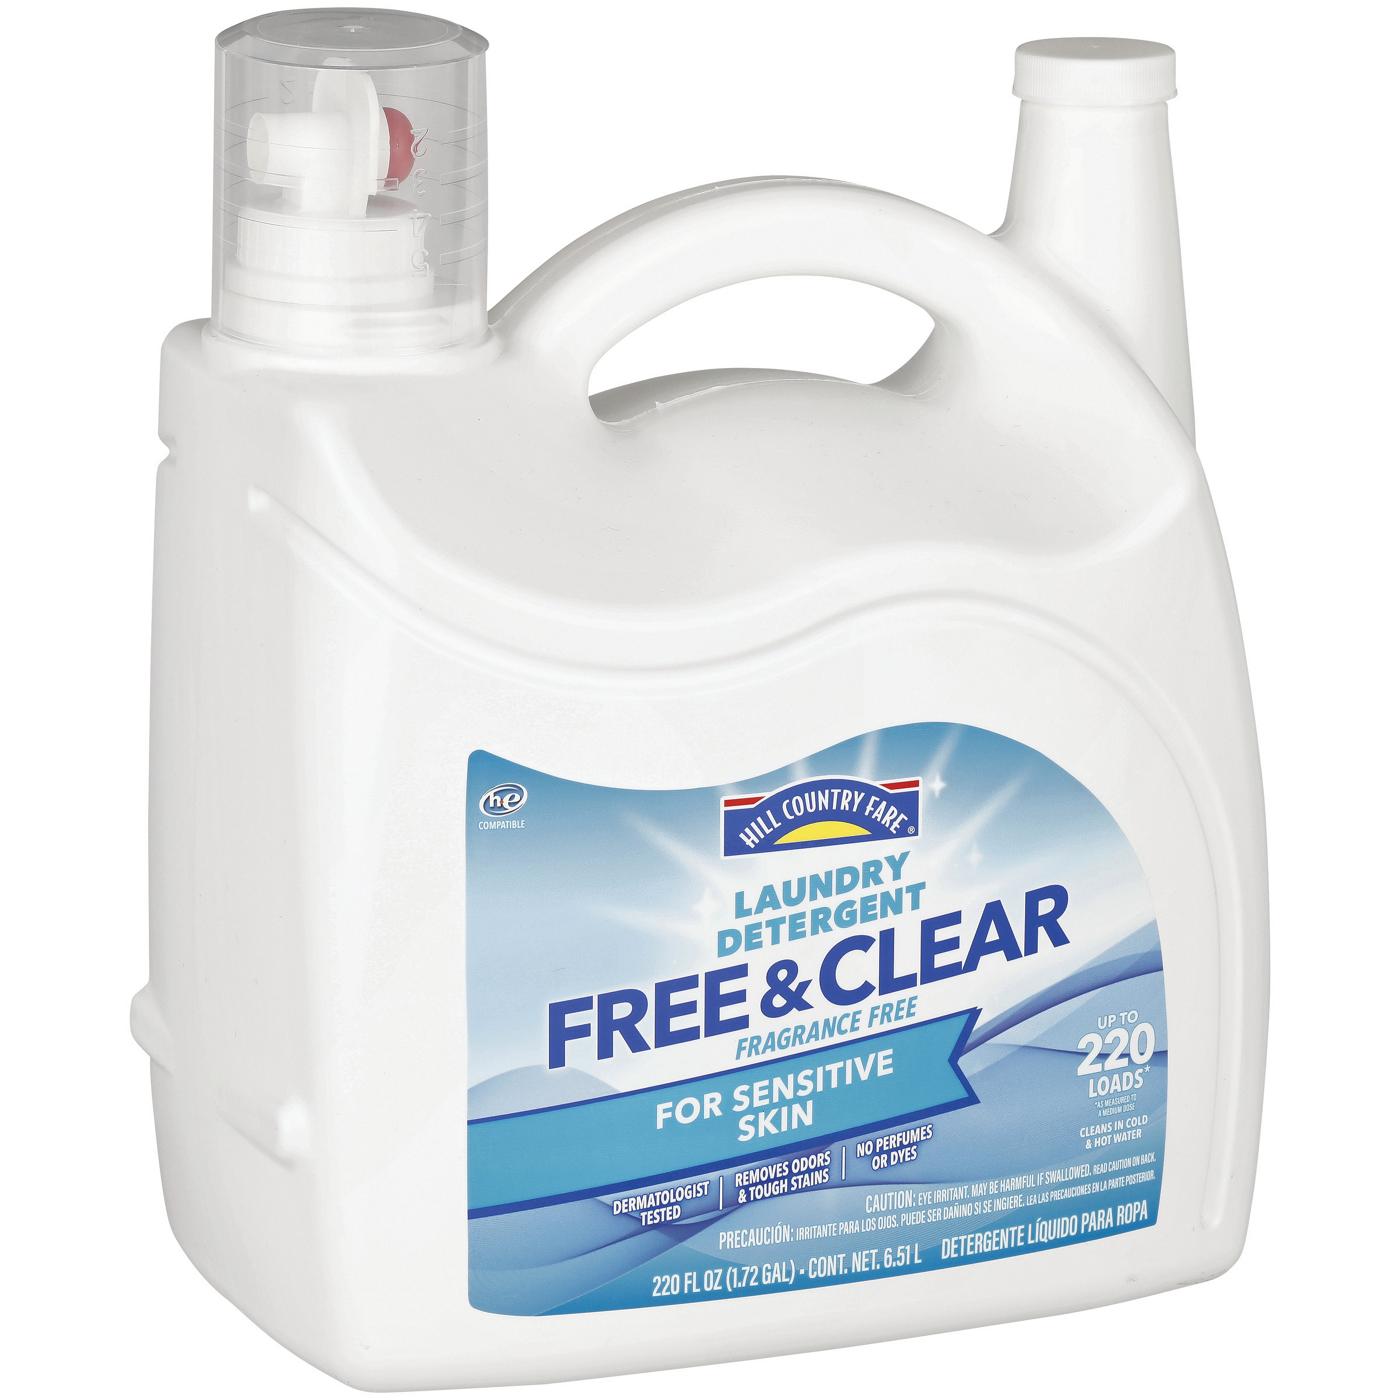 Hill Country Fare Free & Clear HE Liquid Laundry Detergent, 220 Loads – Fragrance-Free; image 3 of 3